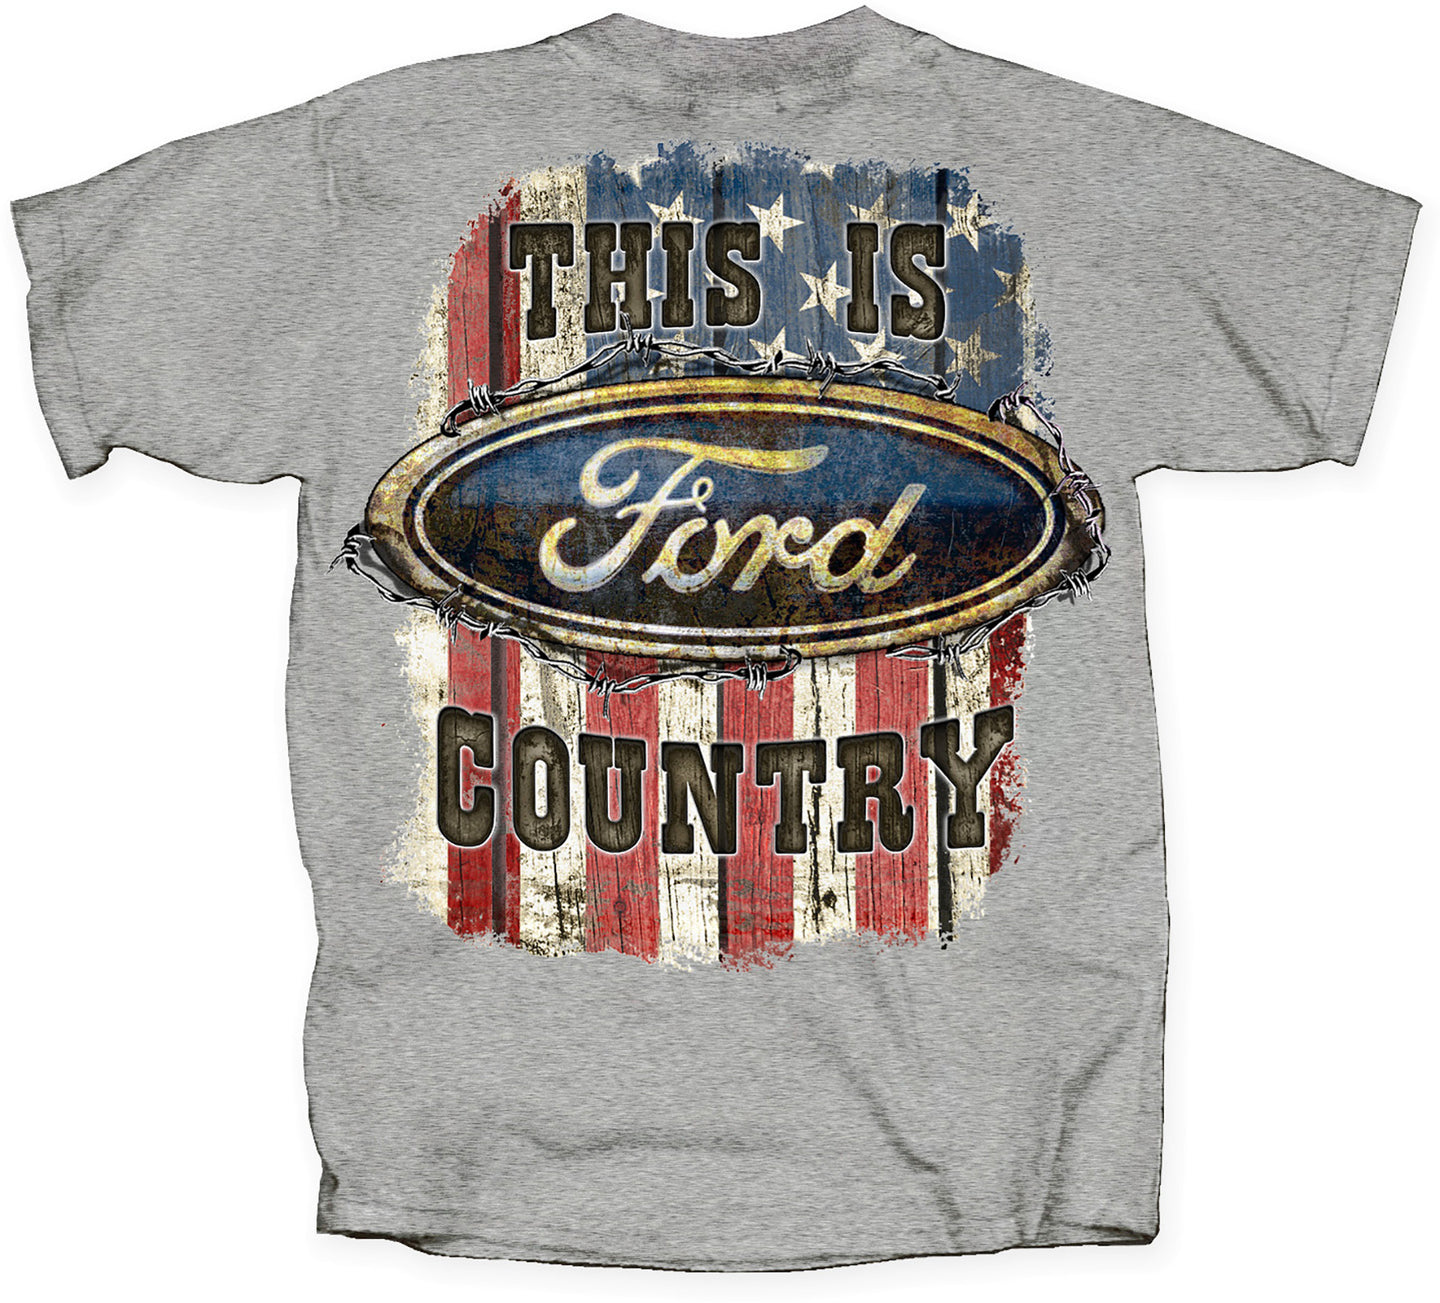 This is Ford Country